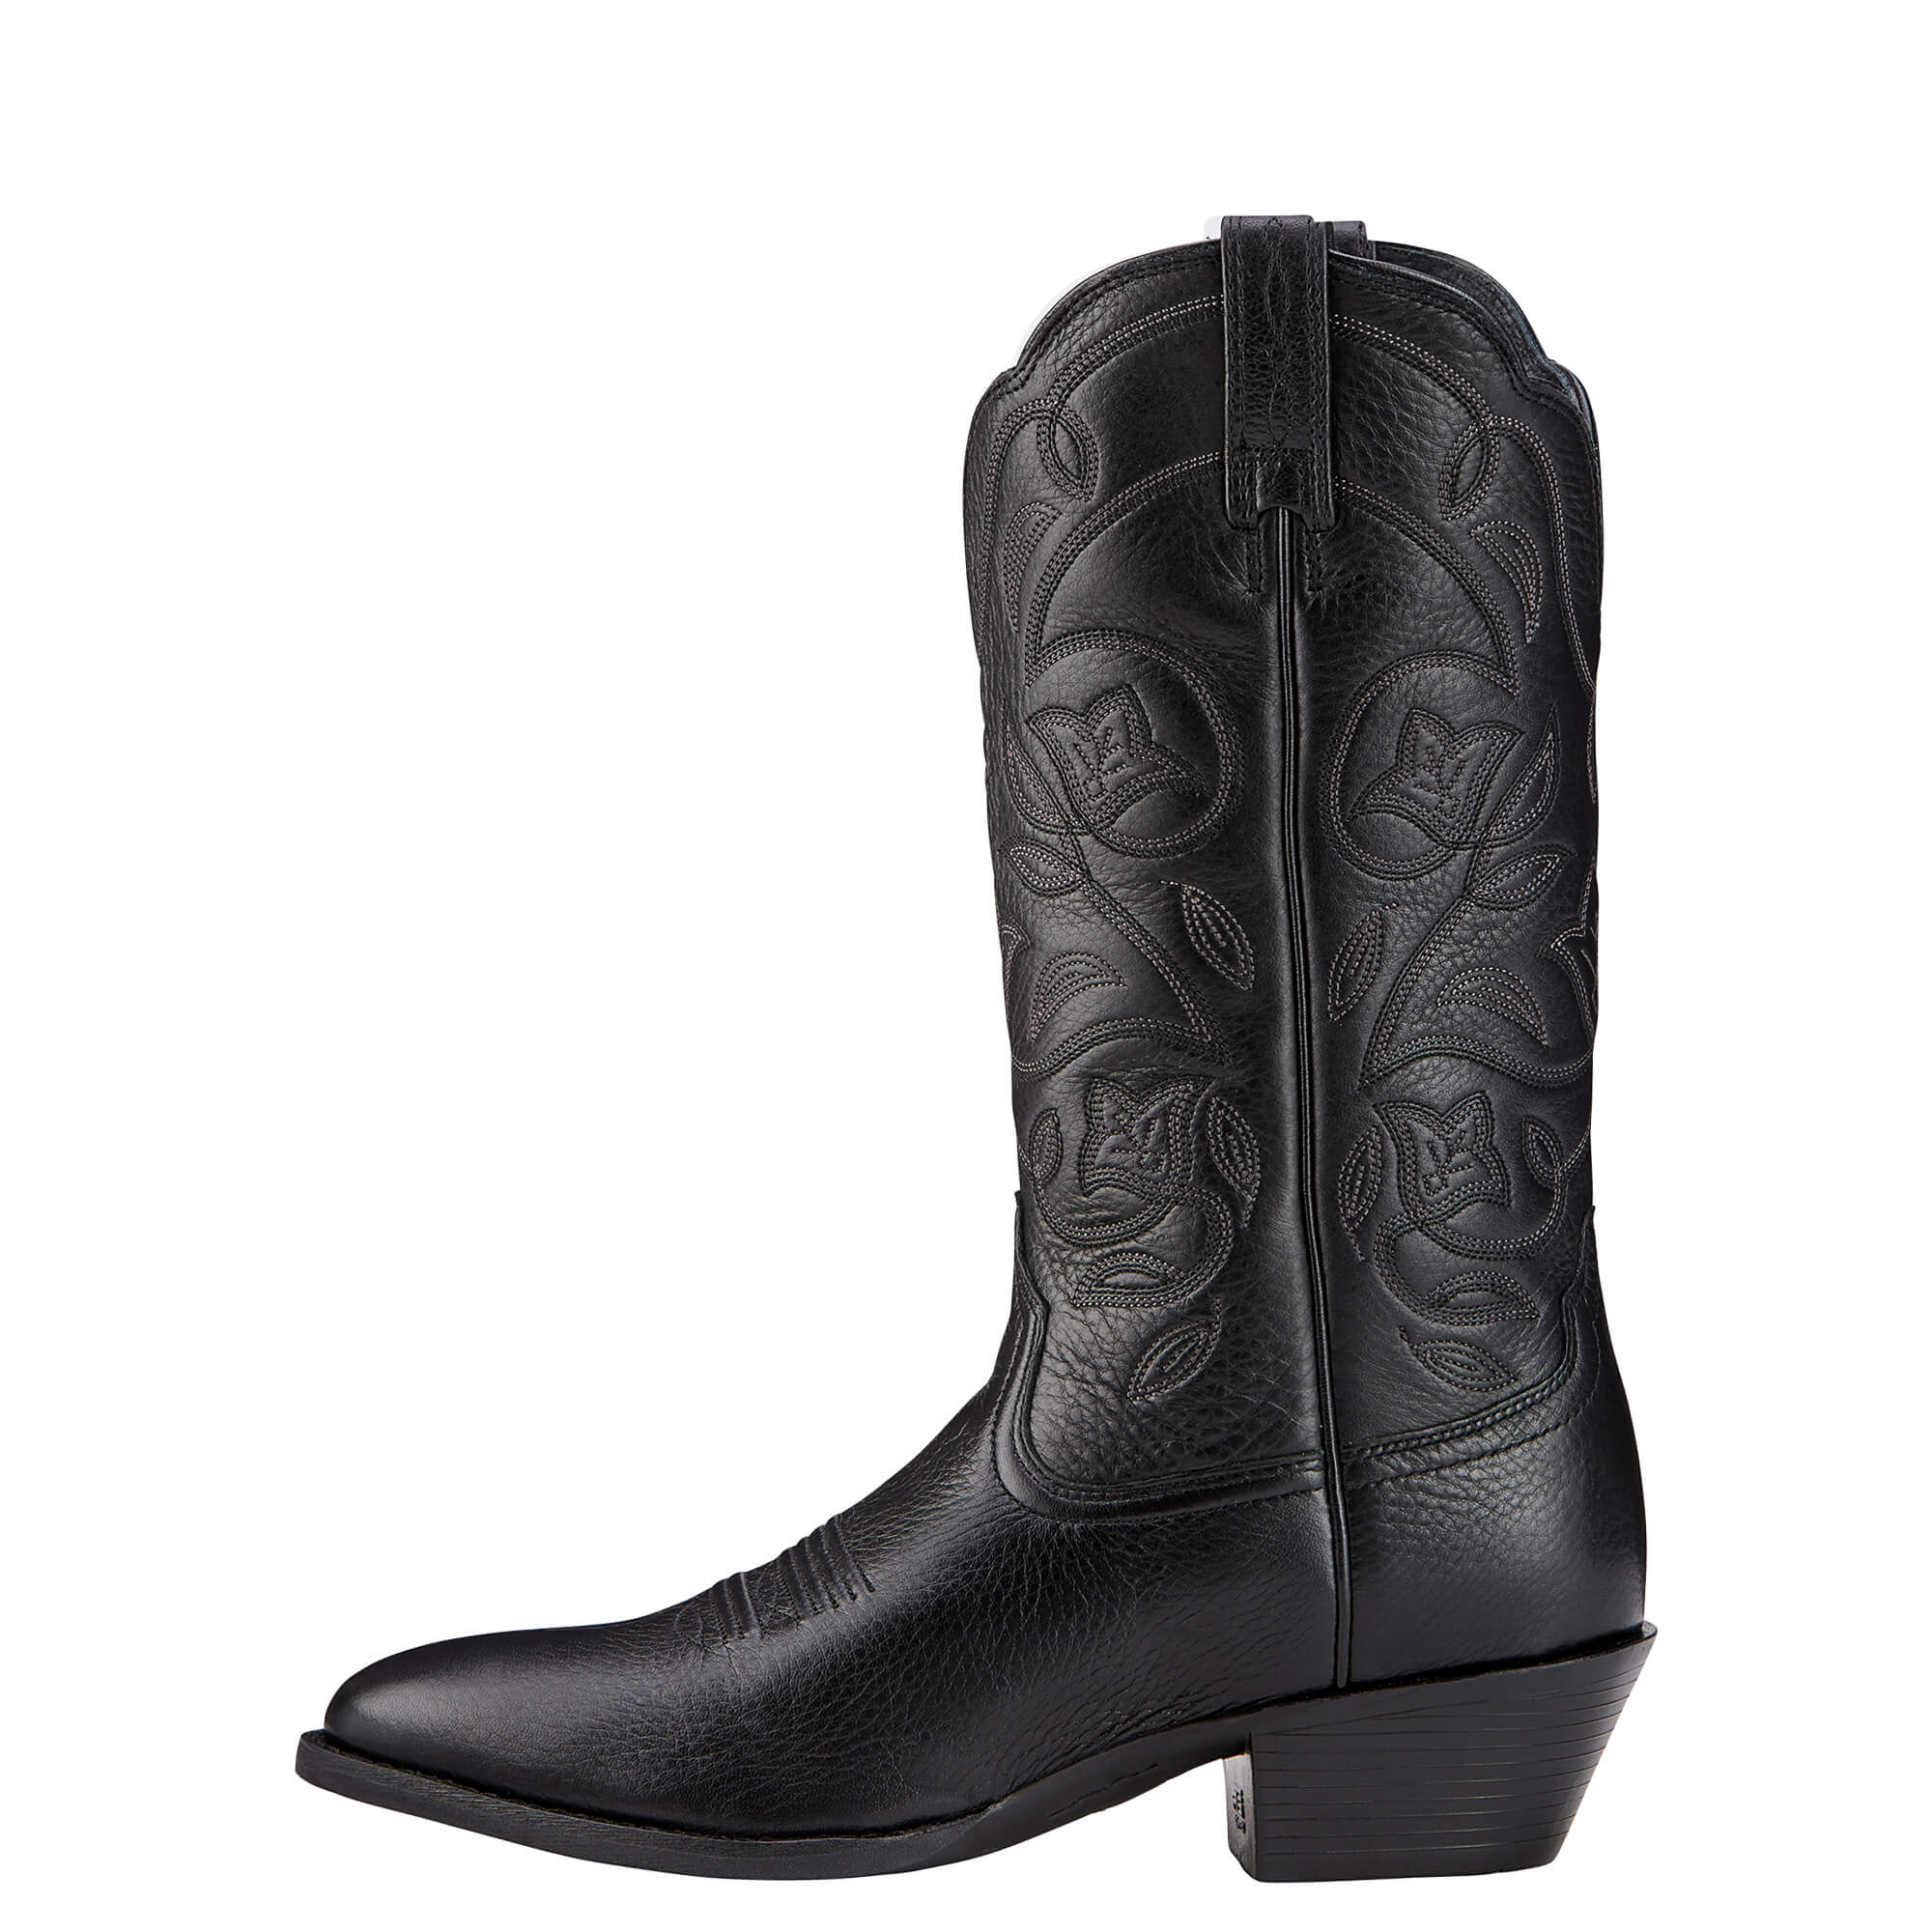 Ariat_Heritage_R_Toe_Western_Boot_10001037_3-4_Side